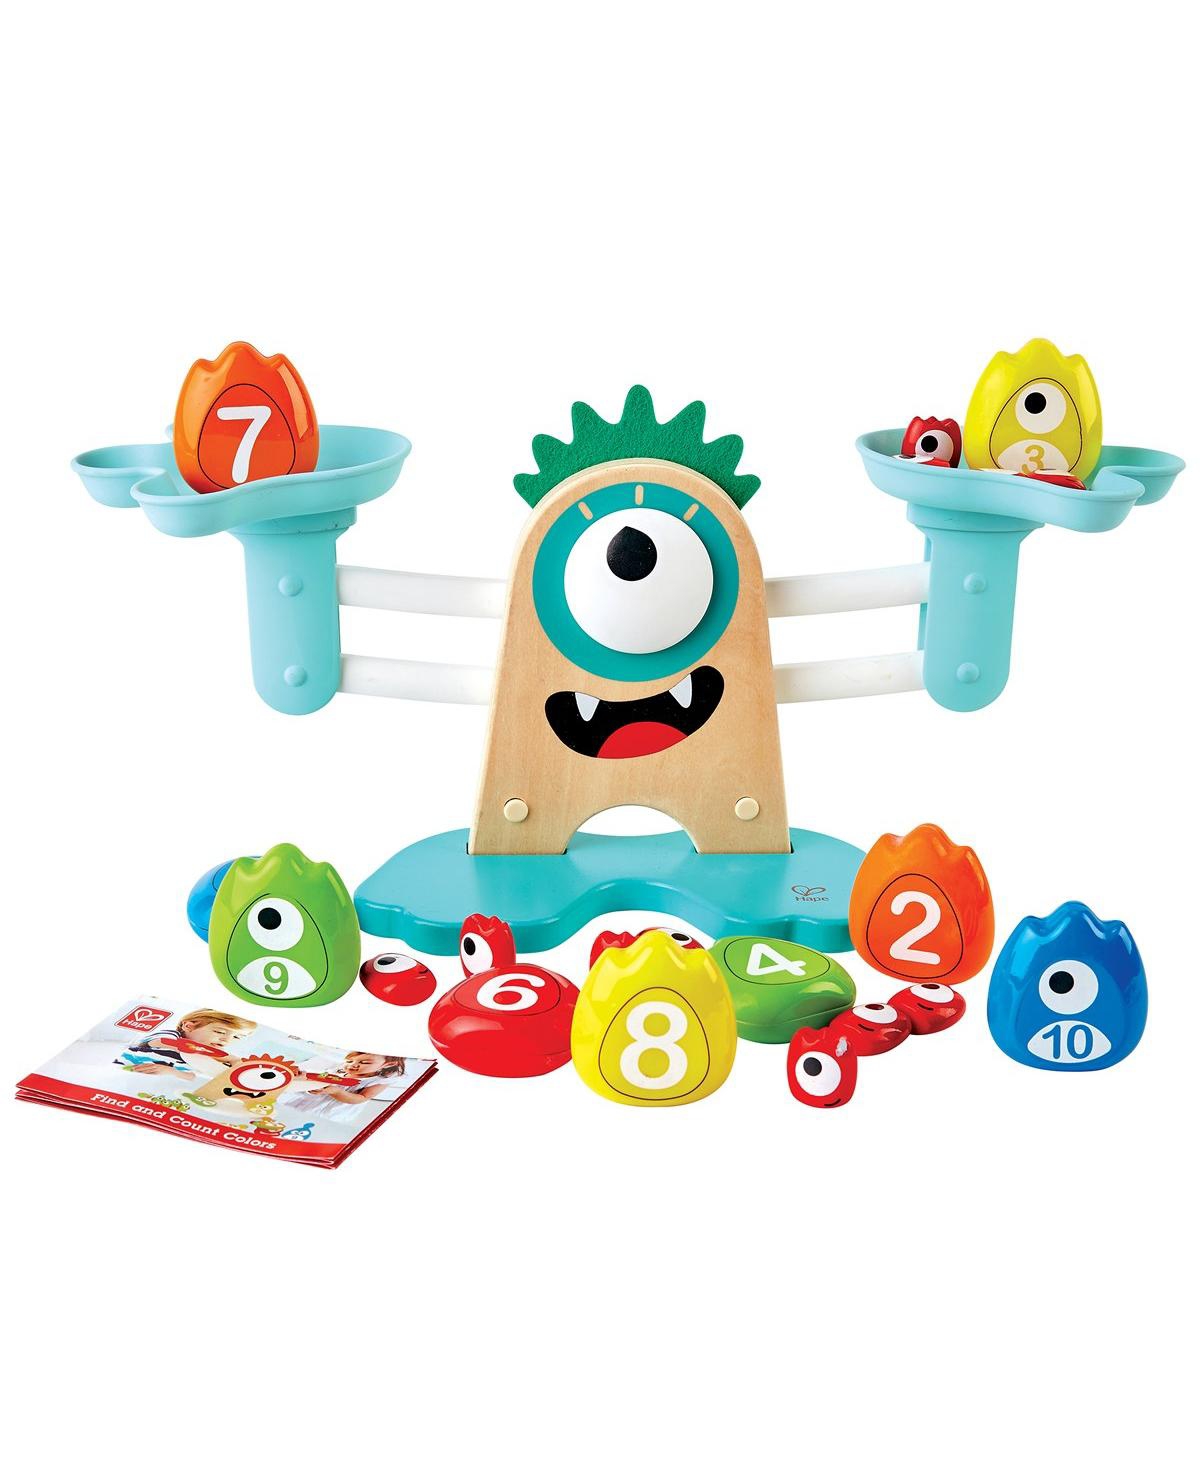 Hape Kids' Monster Math Scale In Multicolored